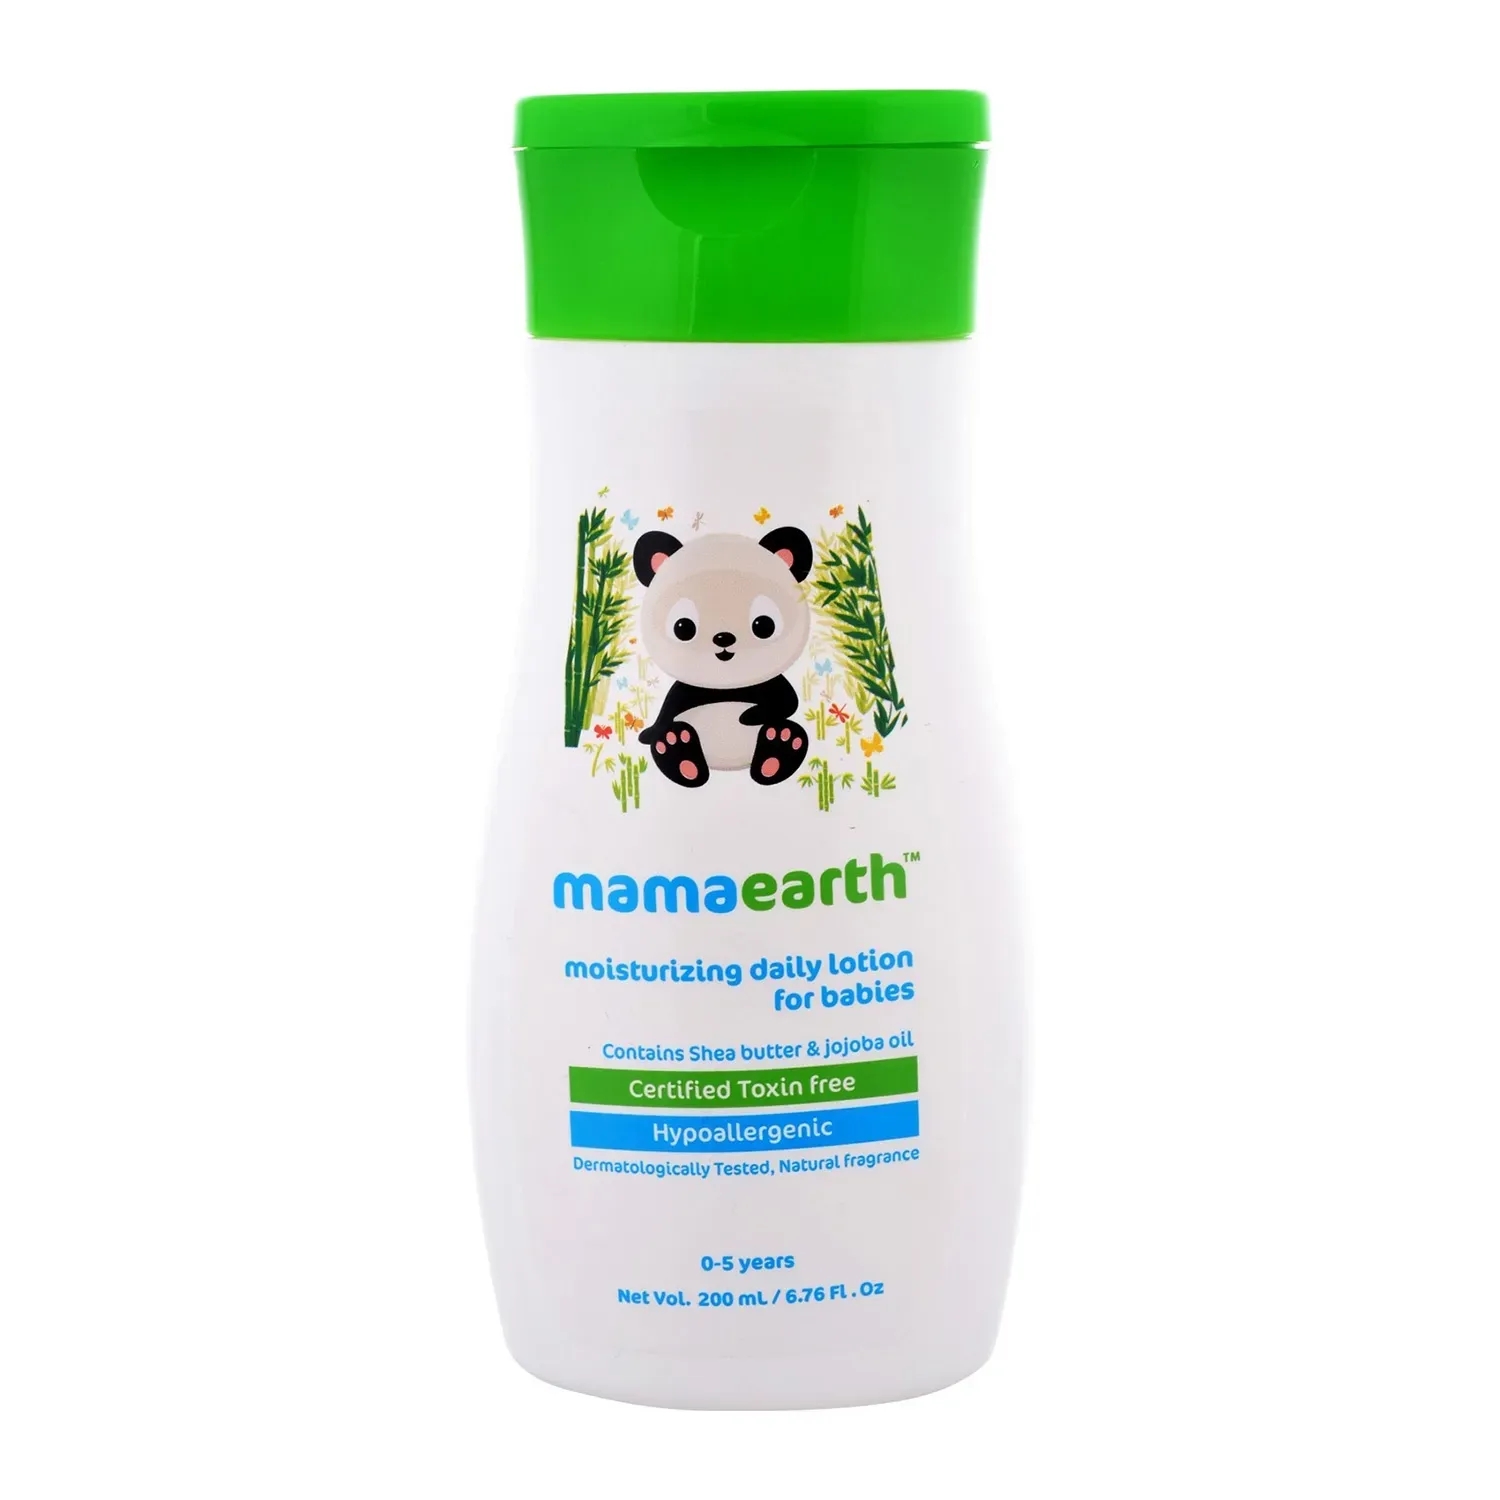 Mamaearth Moisturizing Daily Lotion For Babies (200ml)